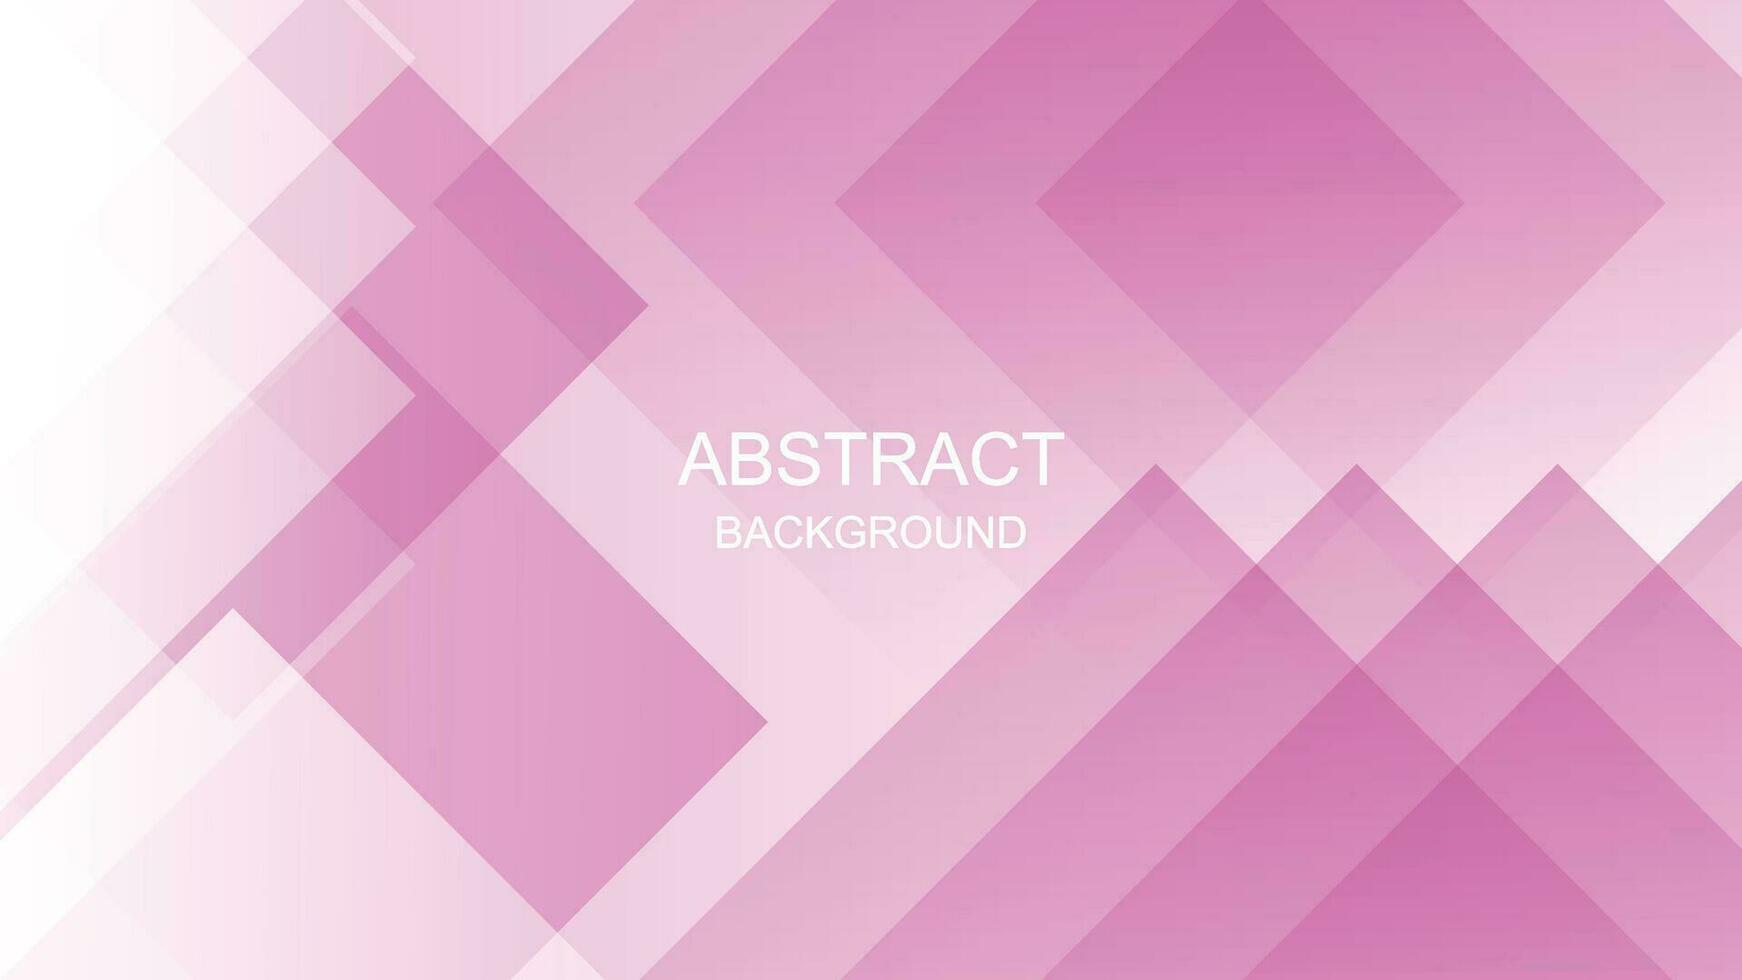 Gradient Abstract Background vector